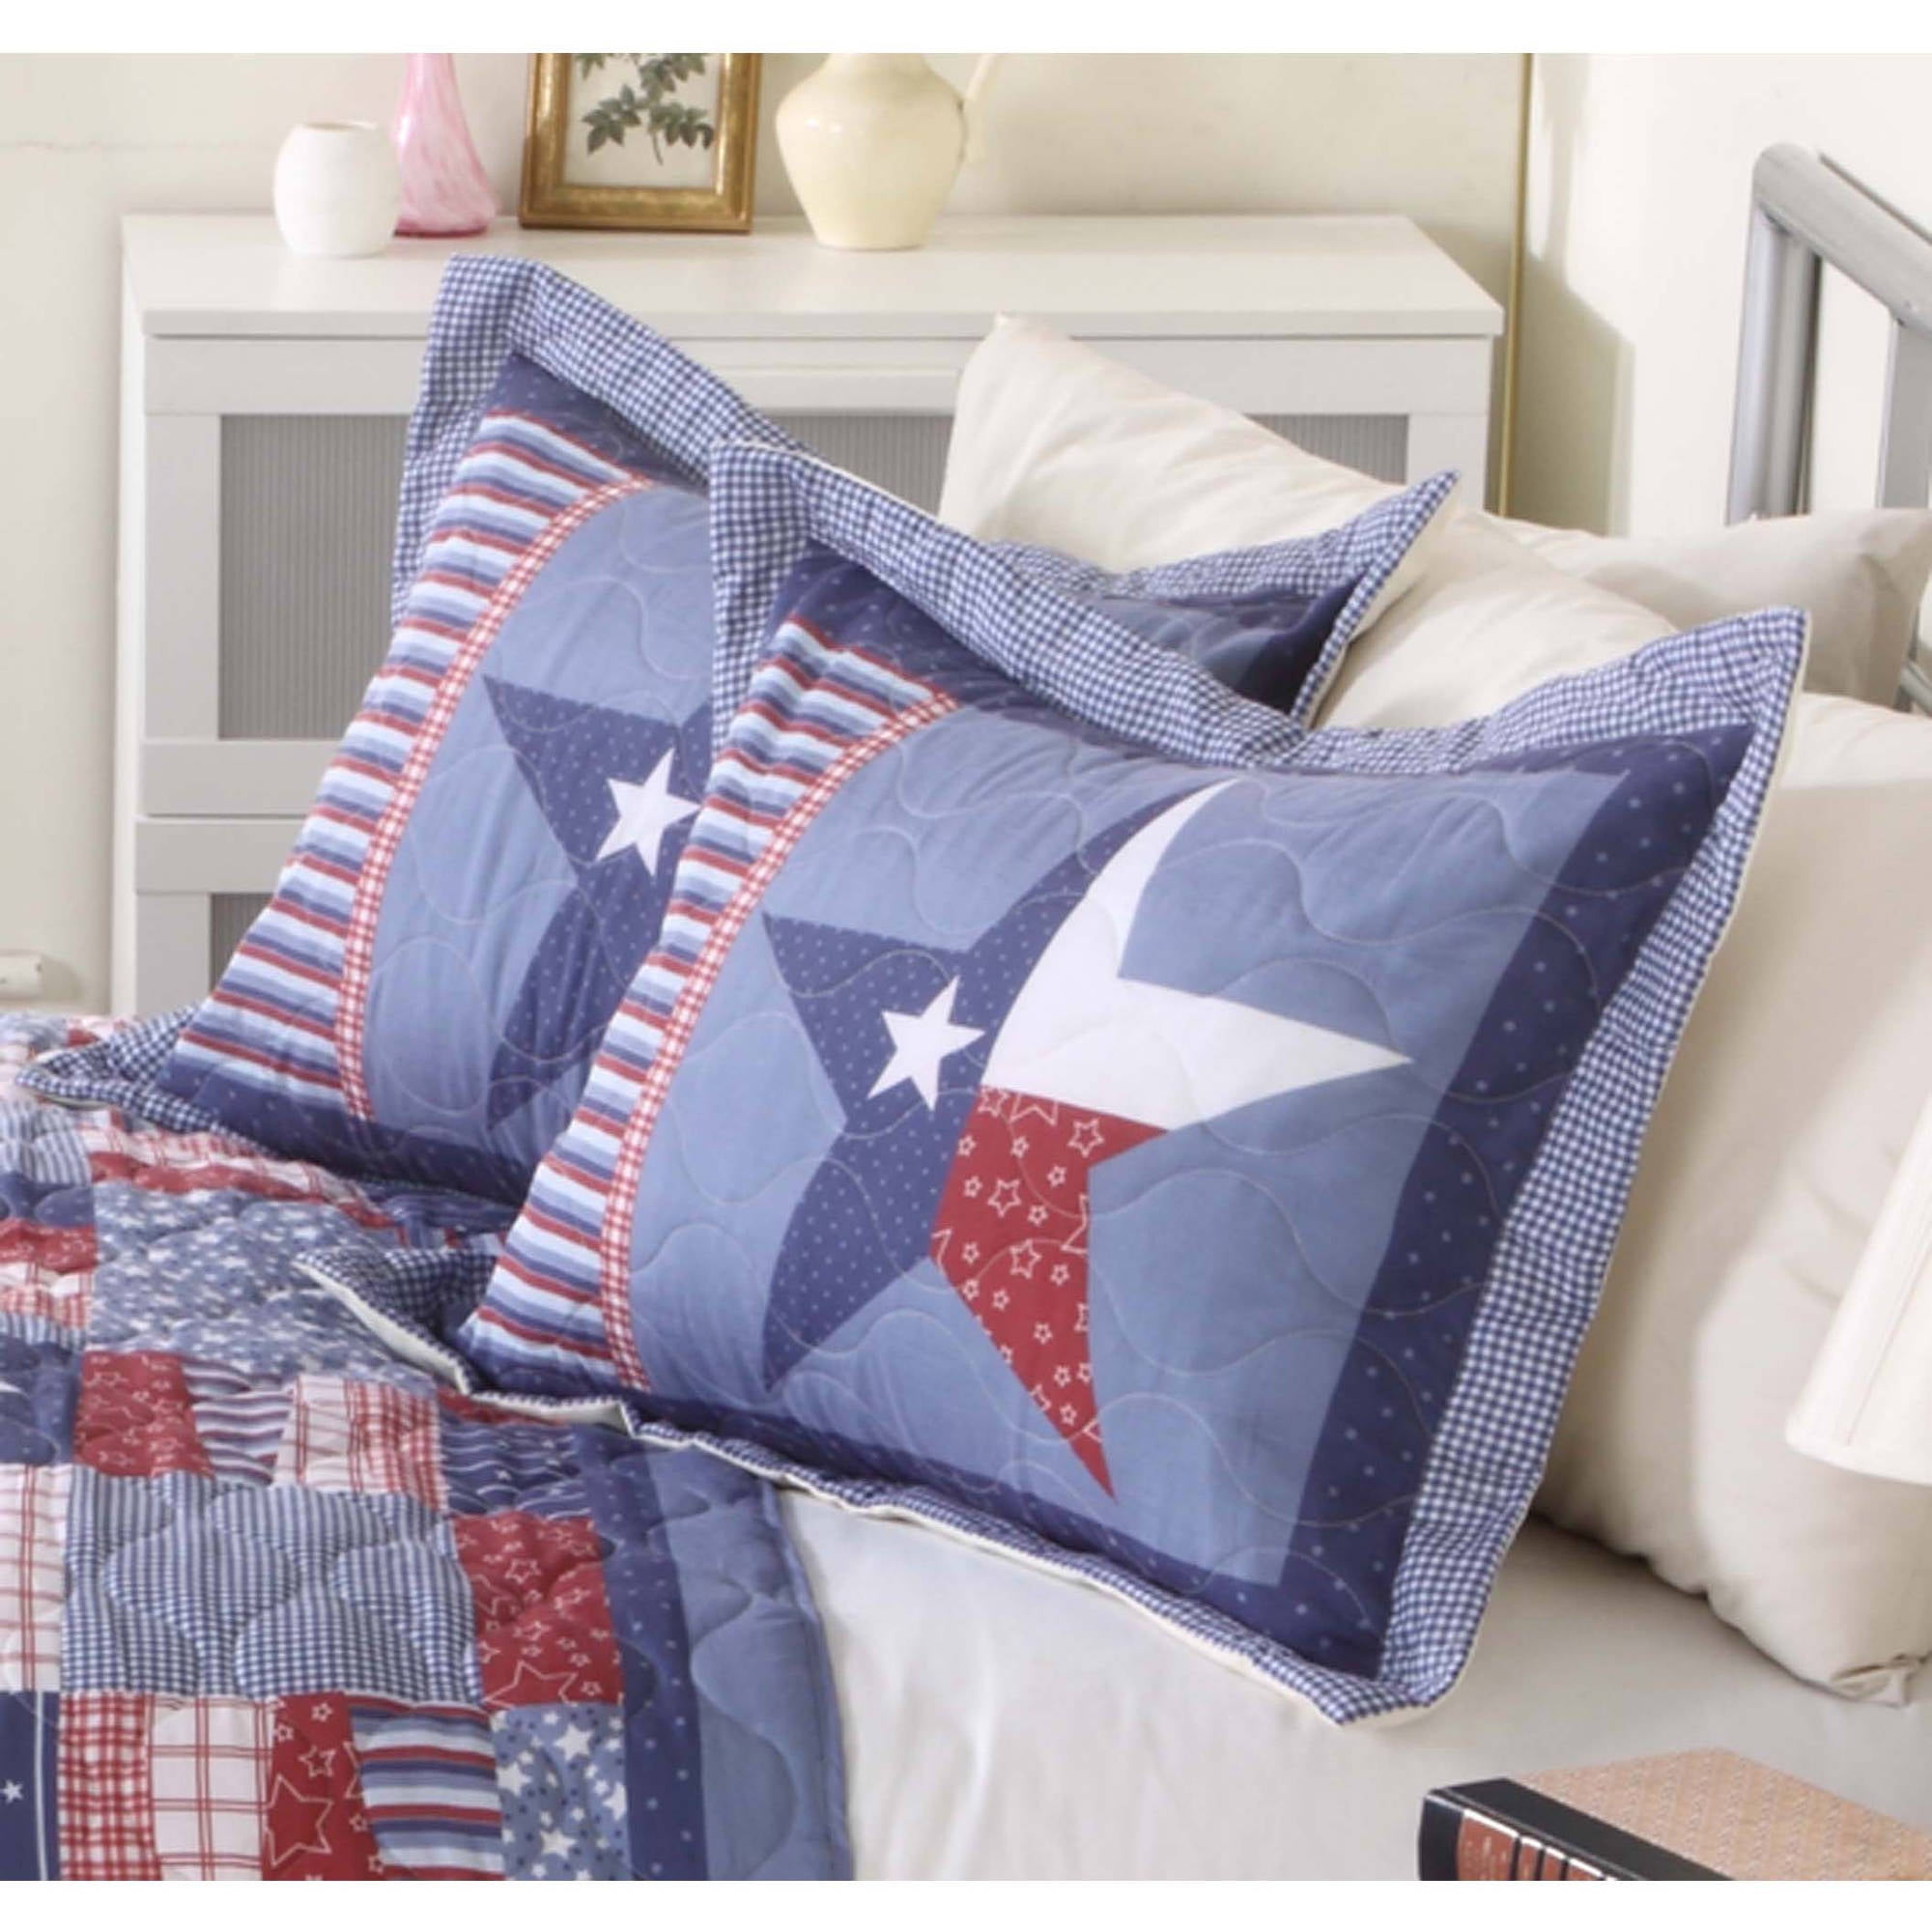 New Mainstays Star & Stripes Quilted King Size Pillow Sham 1 Piece 